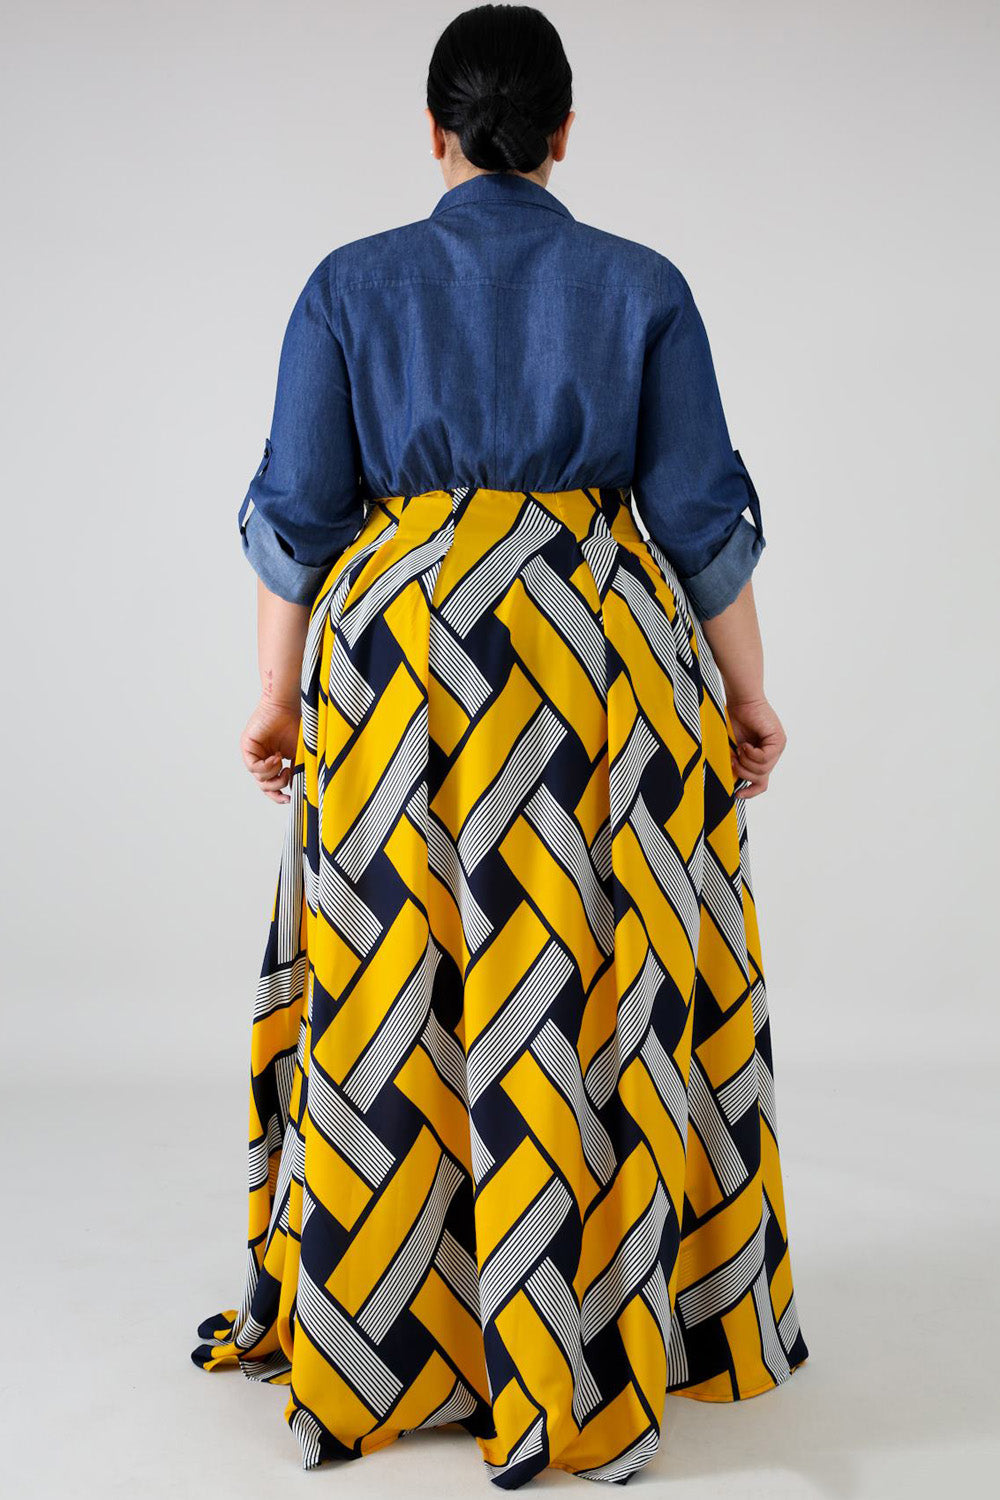 goPals plus size maxi dress with denim shirt and yellow printed flowy skirt. 